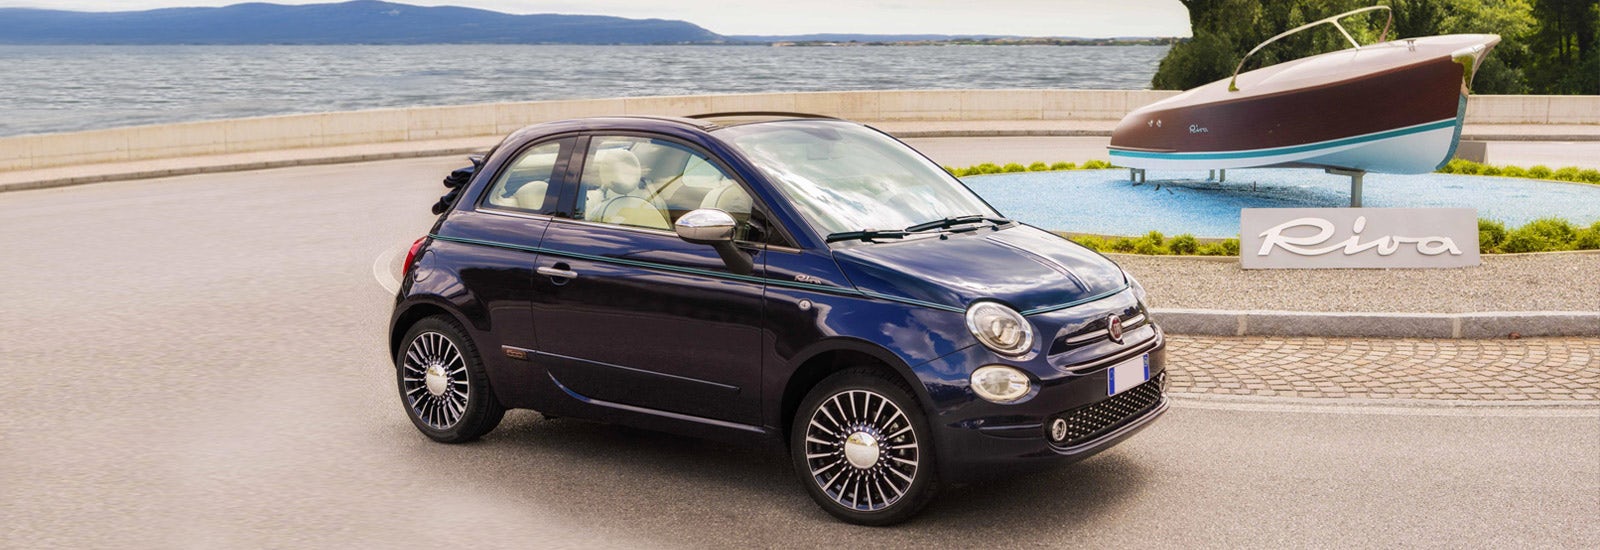 Fiat 500 Riva Special Edition Complete Guide Carwow